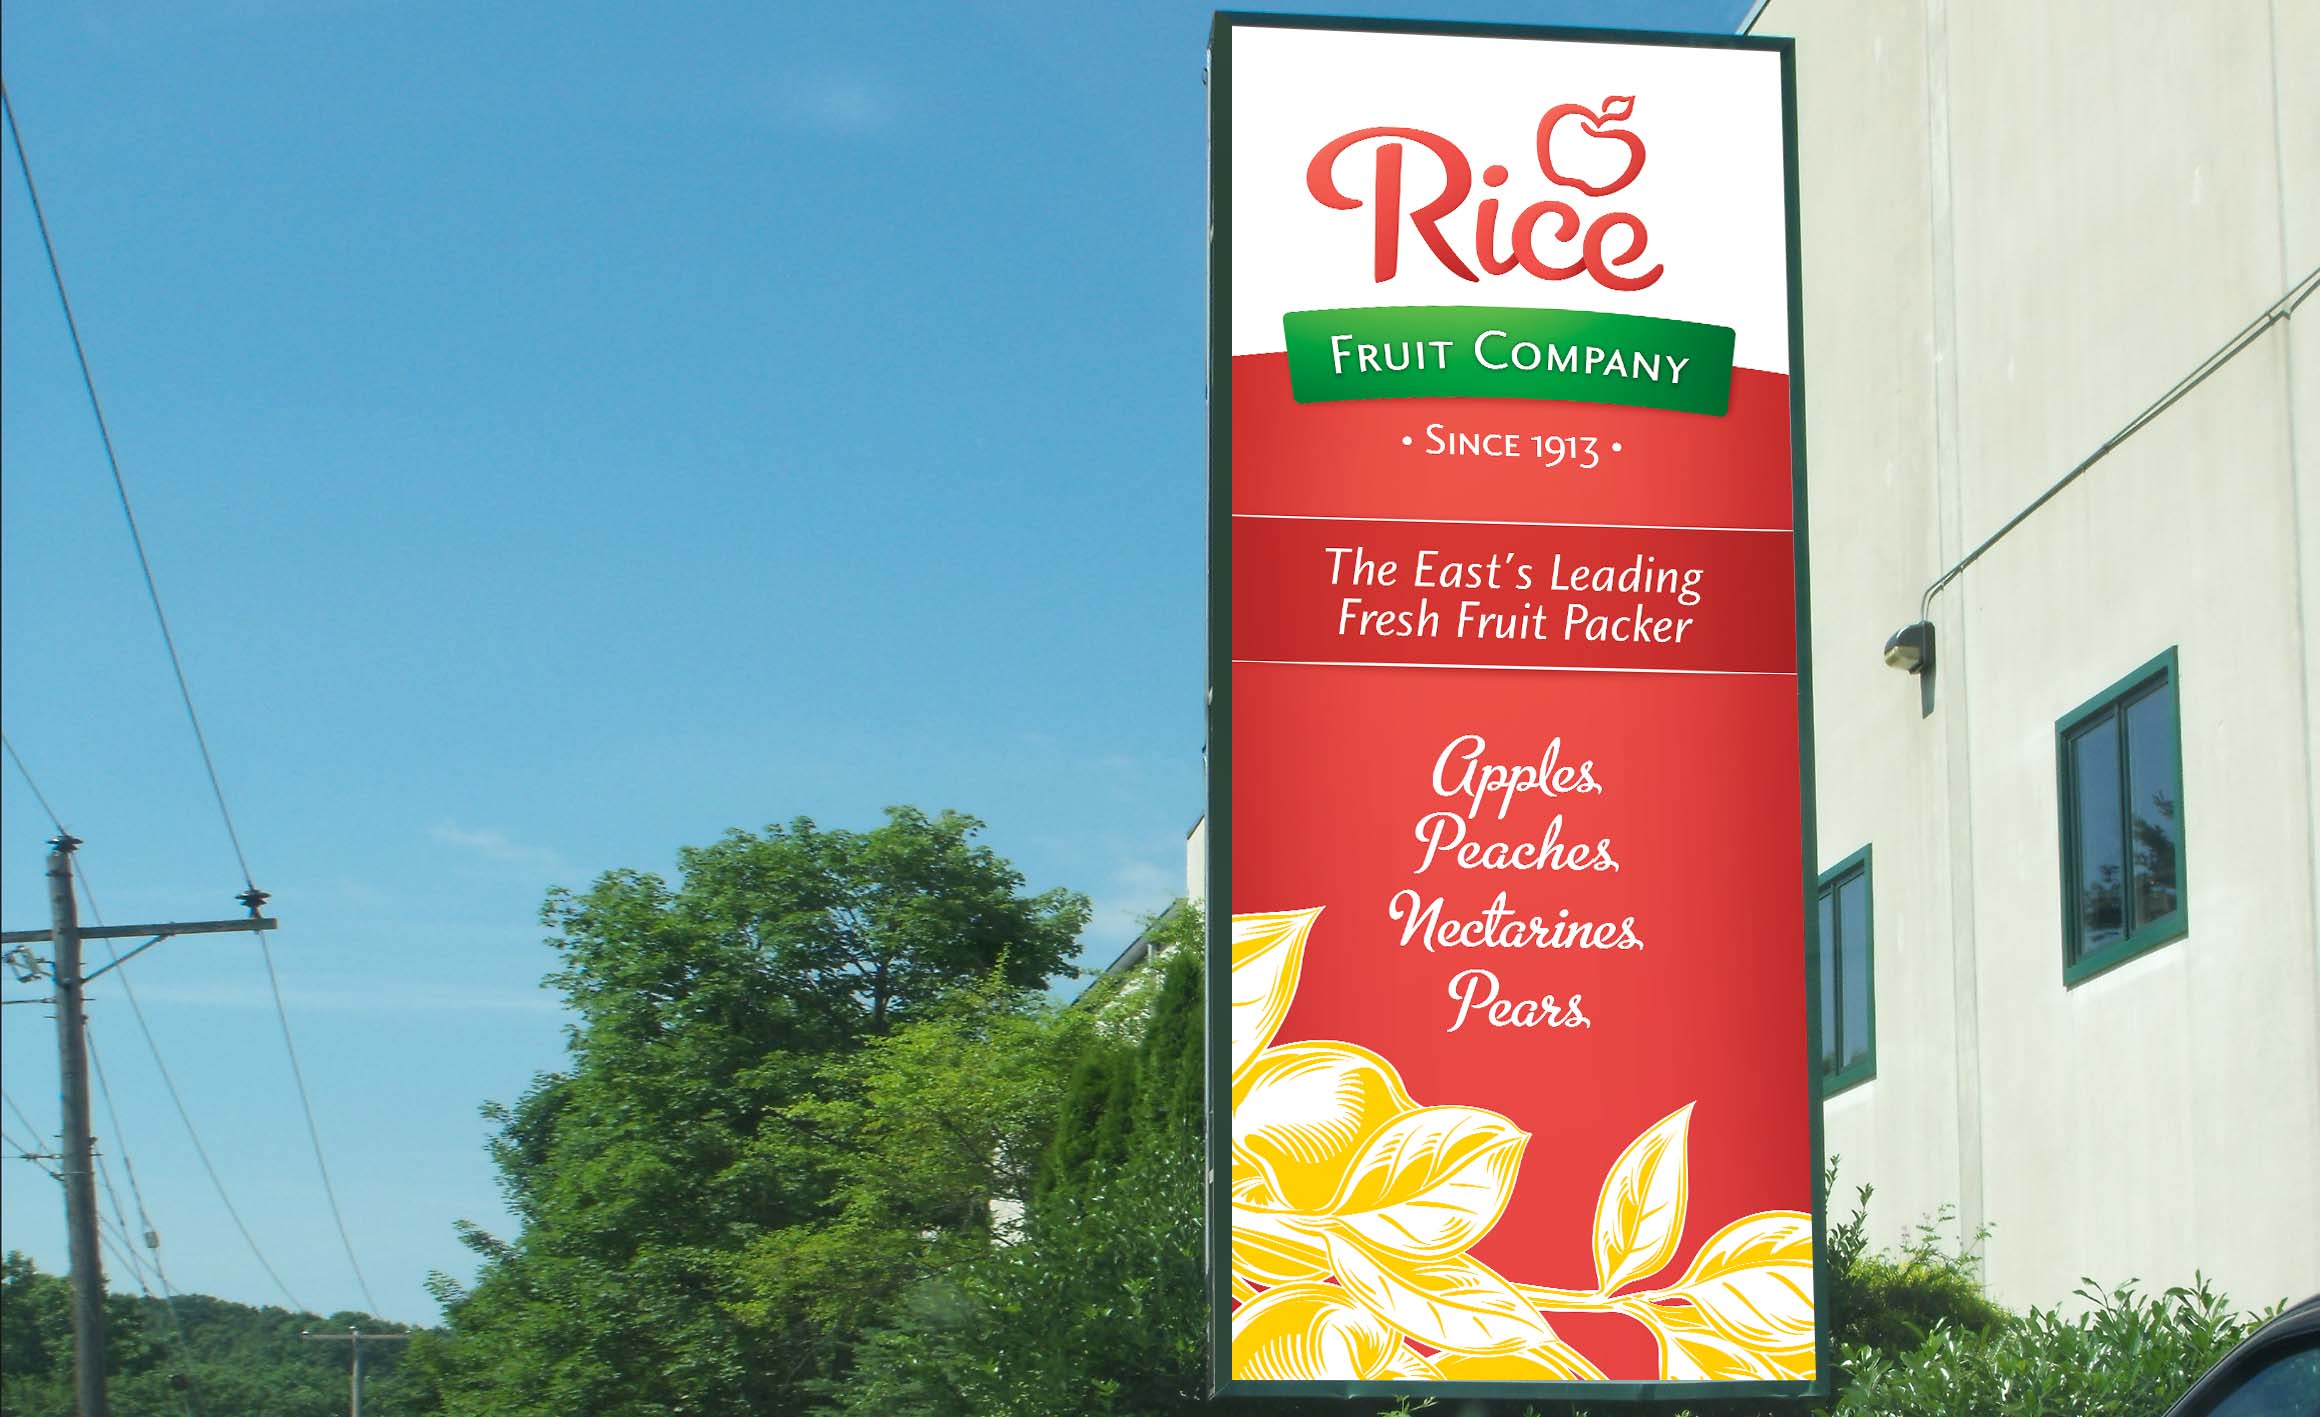 rice fruit banner wide